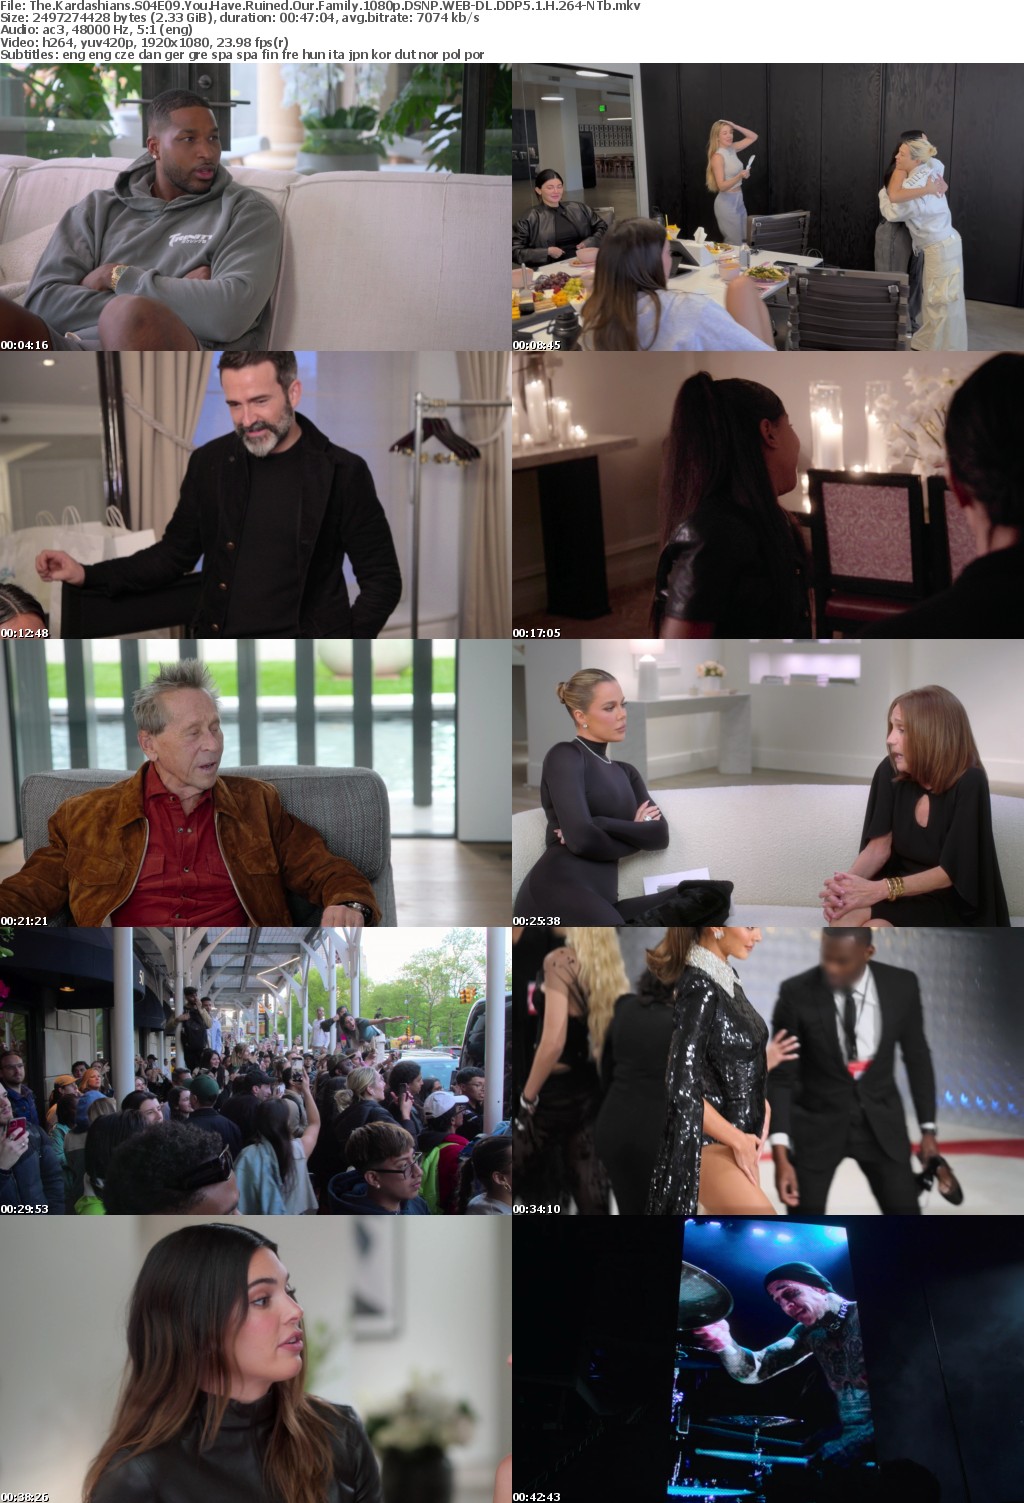 The Kardashians S04E09 You Have Ruined Our Family 1080p DSNP WEB-DL DDP5 1 H 264-NTb